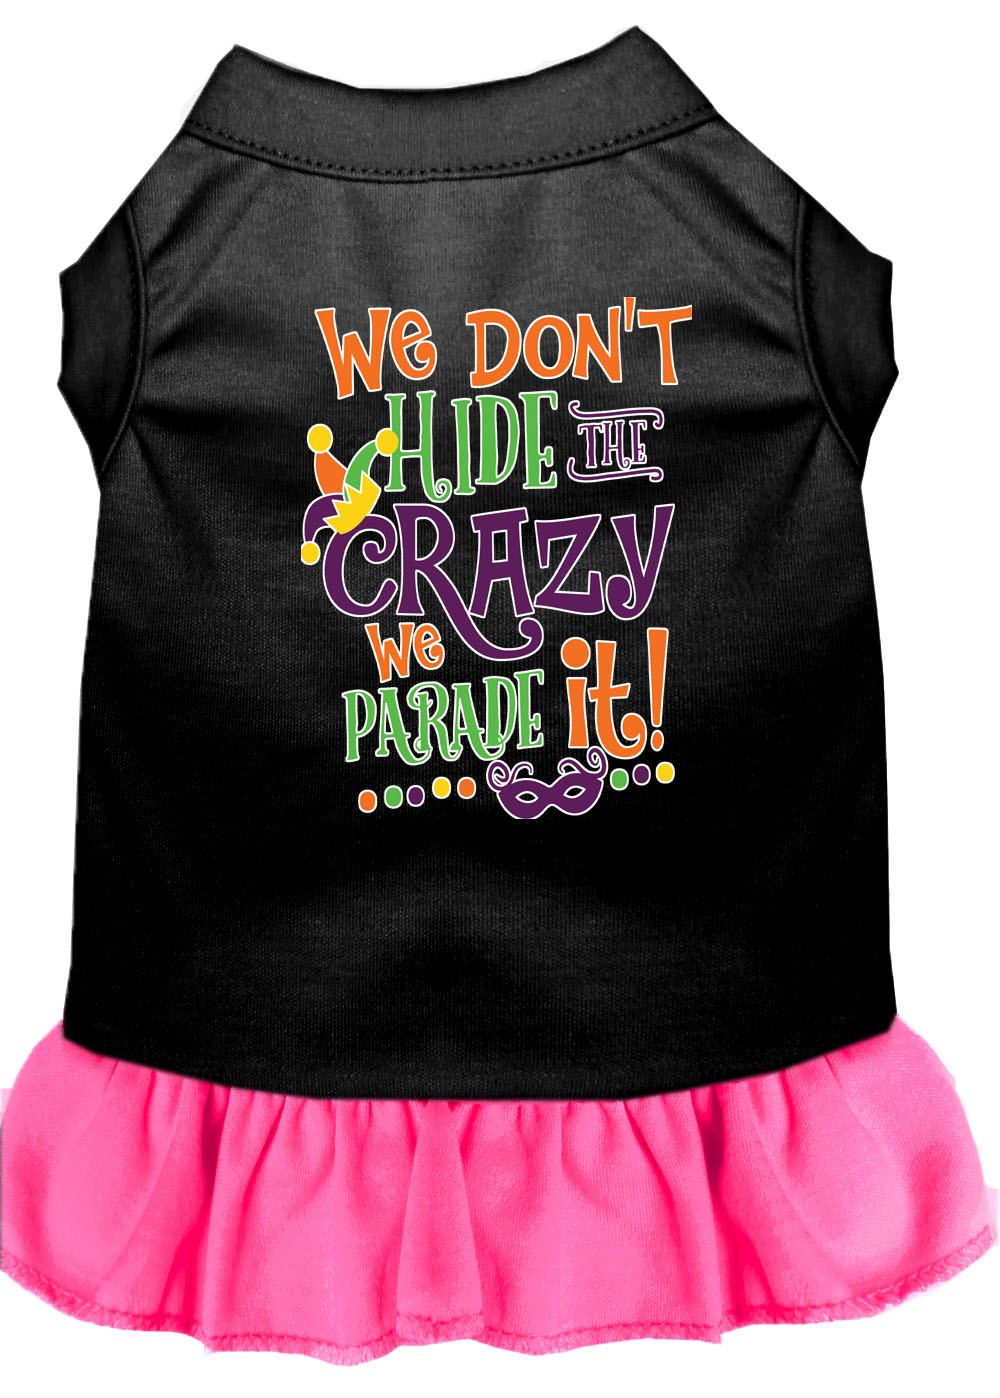 We Don't Hide the Crazy Screen Print Mardi Gras Dog Dress Black with Bright Pink XL